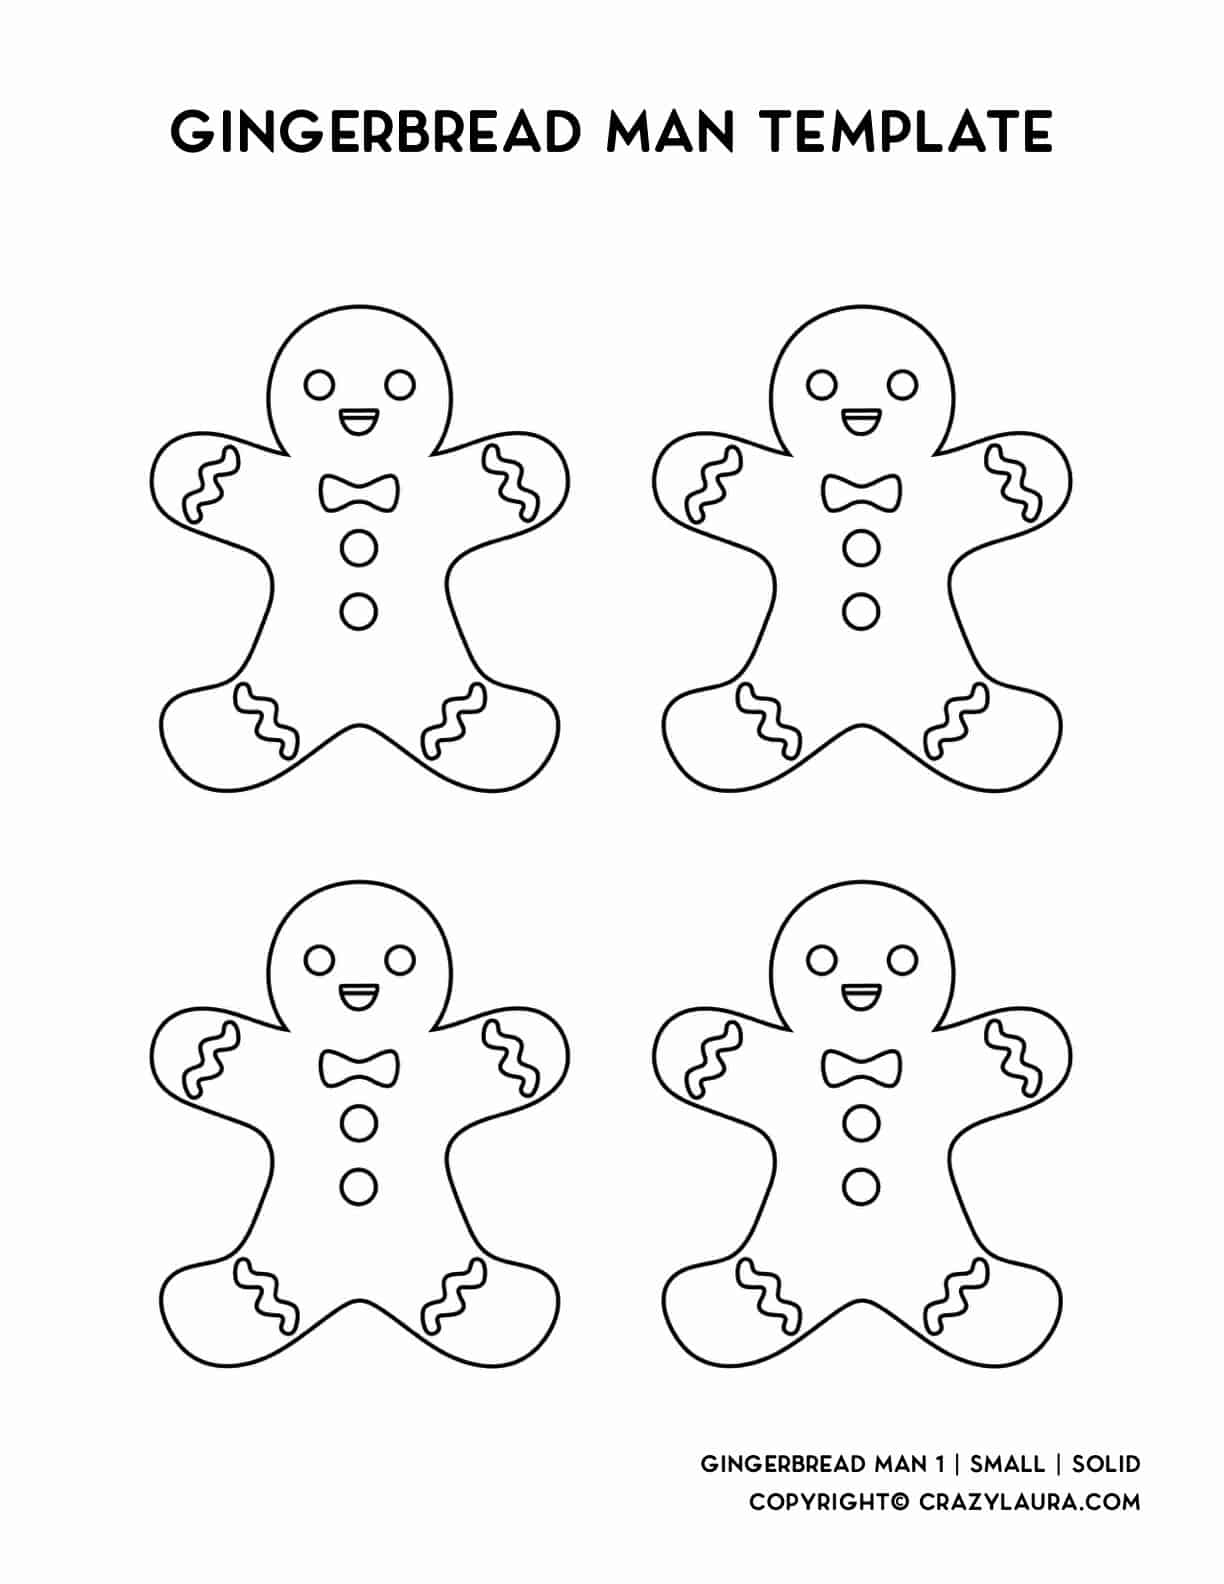 small gingerbread man templates to download